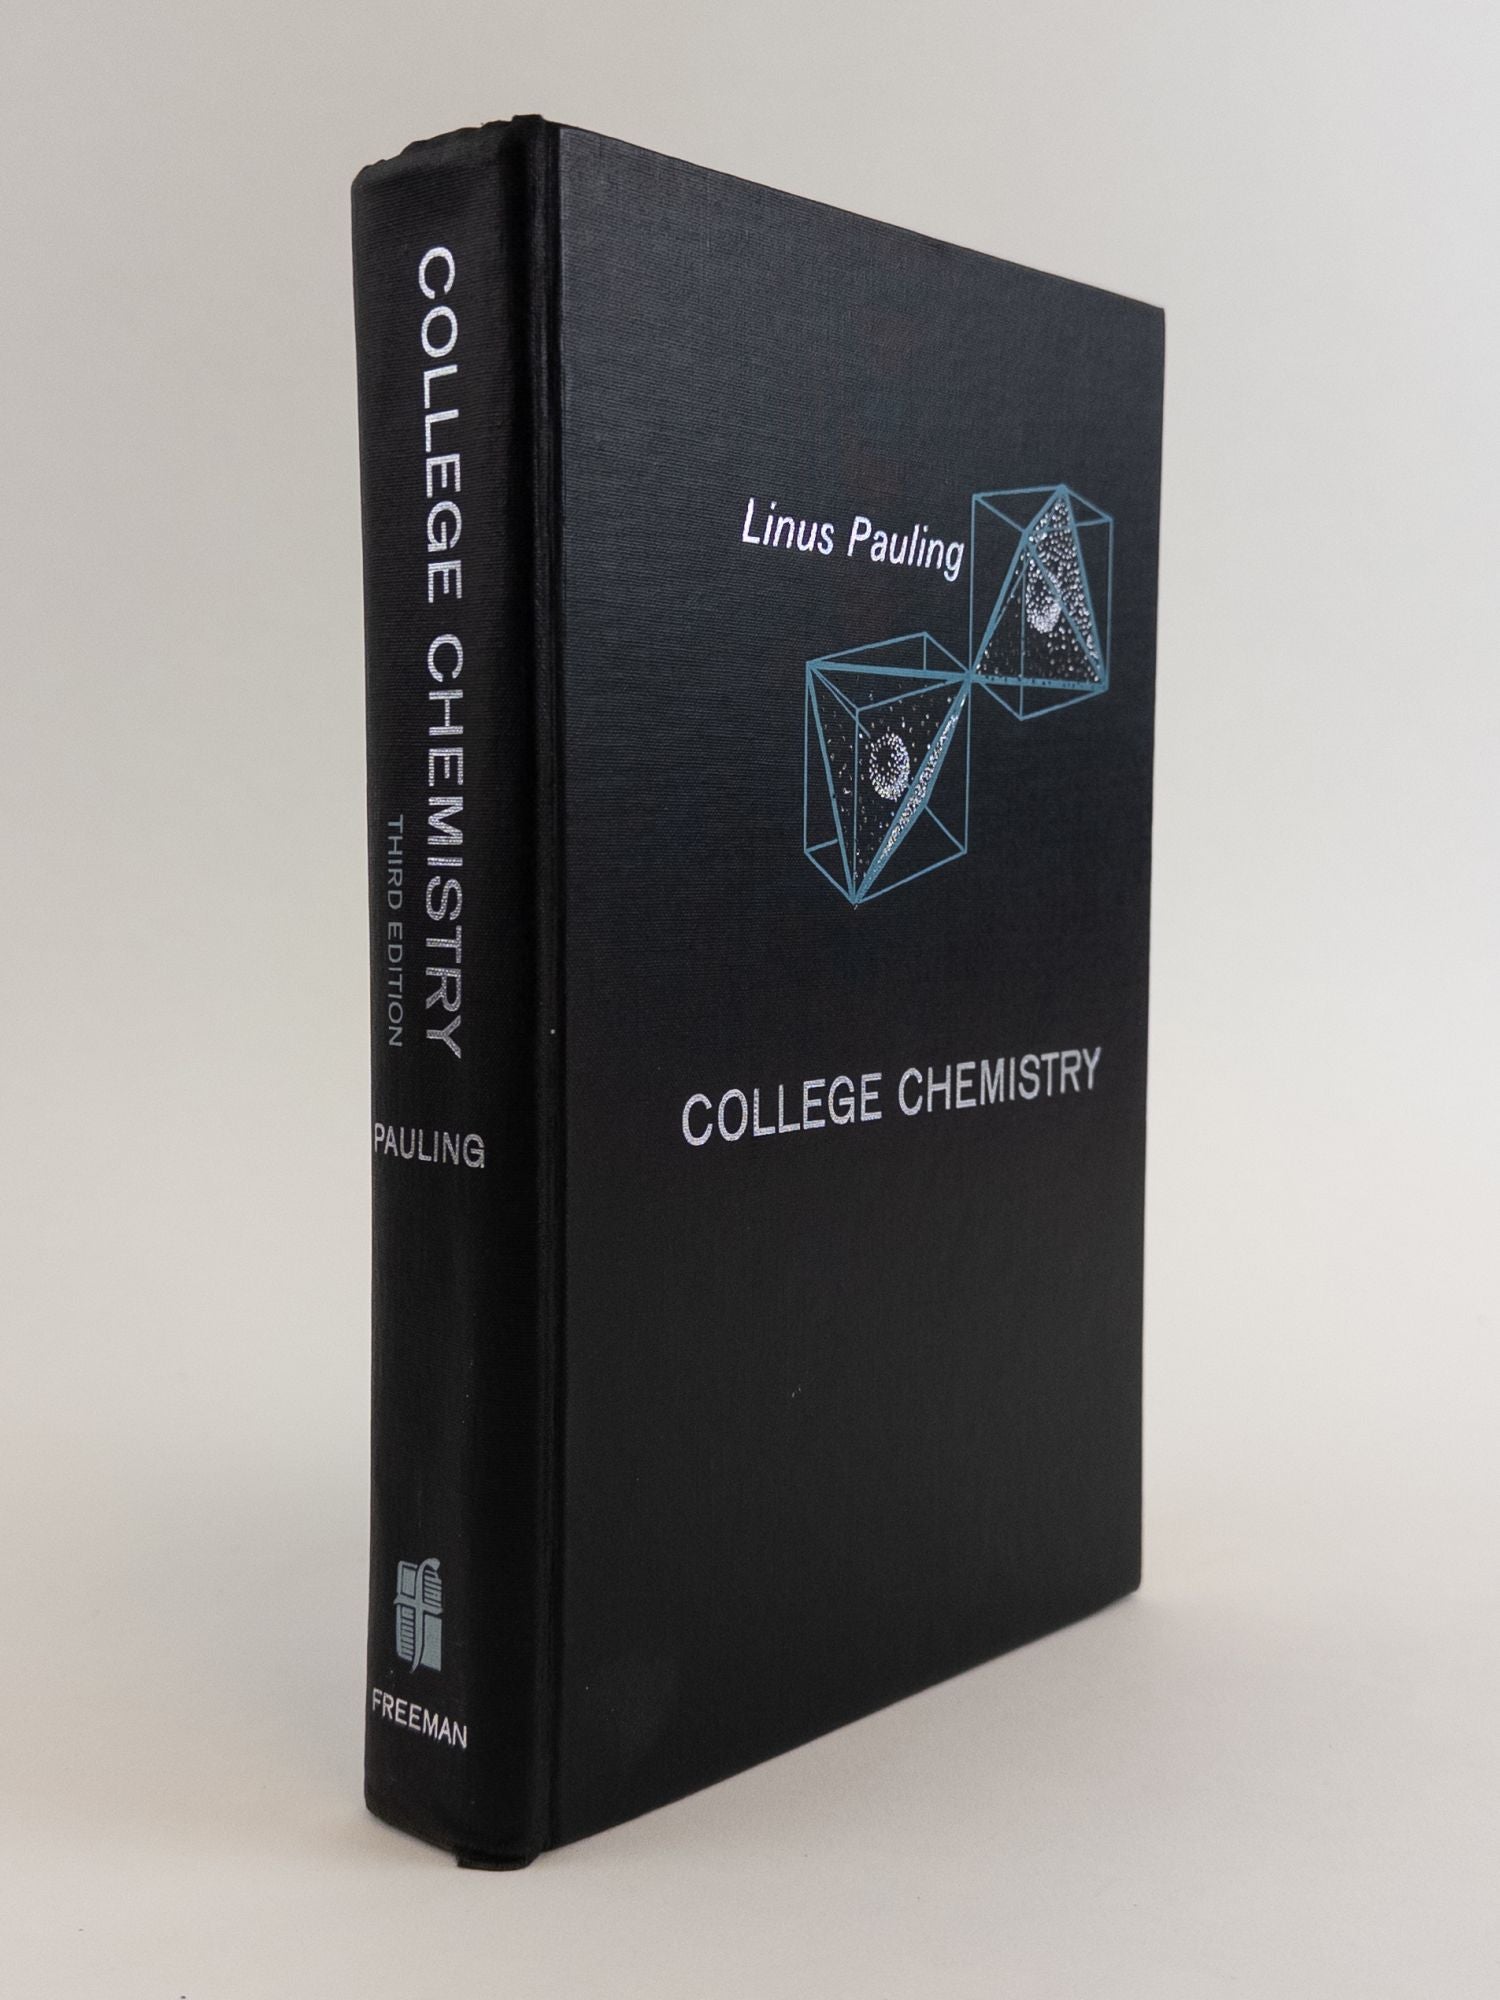 Product Image for COLLEGE CHEMISTRY [SIGNED]